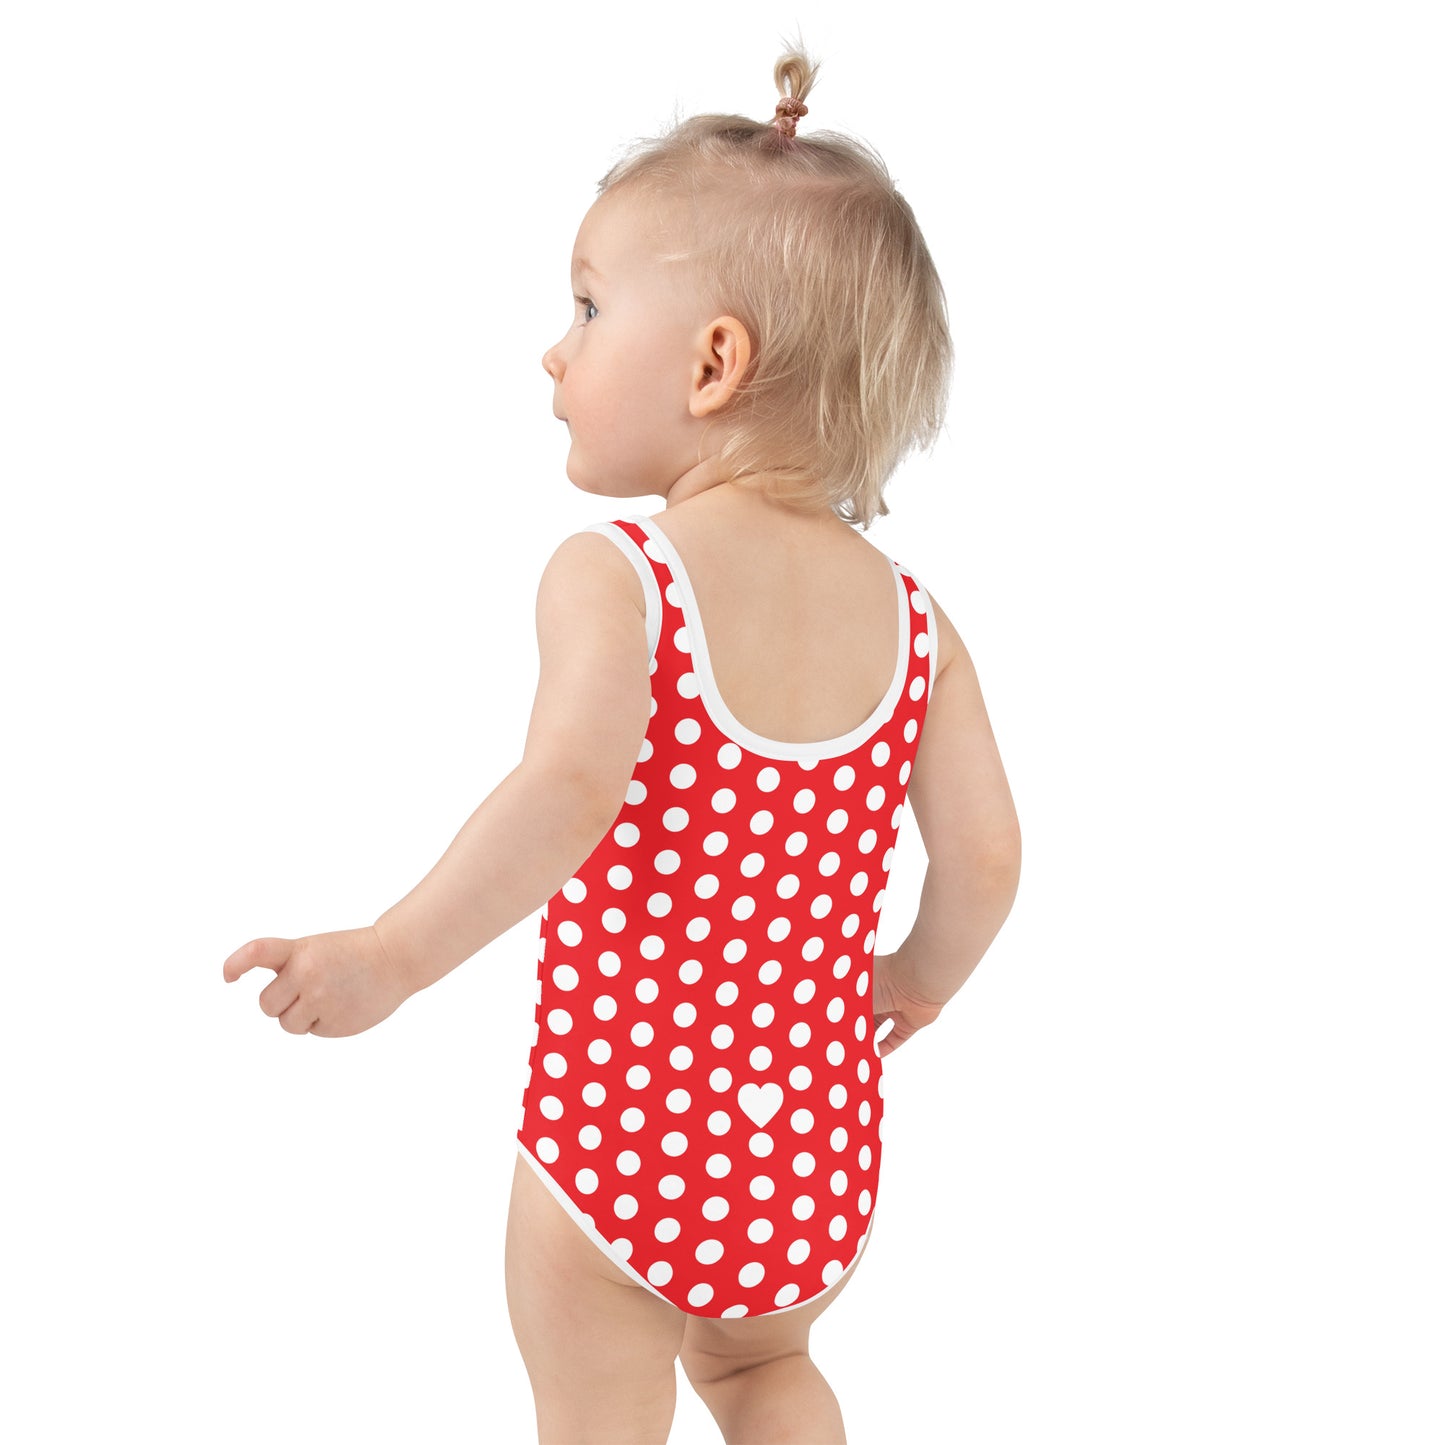 a baby in a red and white polka dot swimsuit